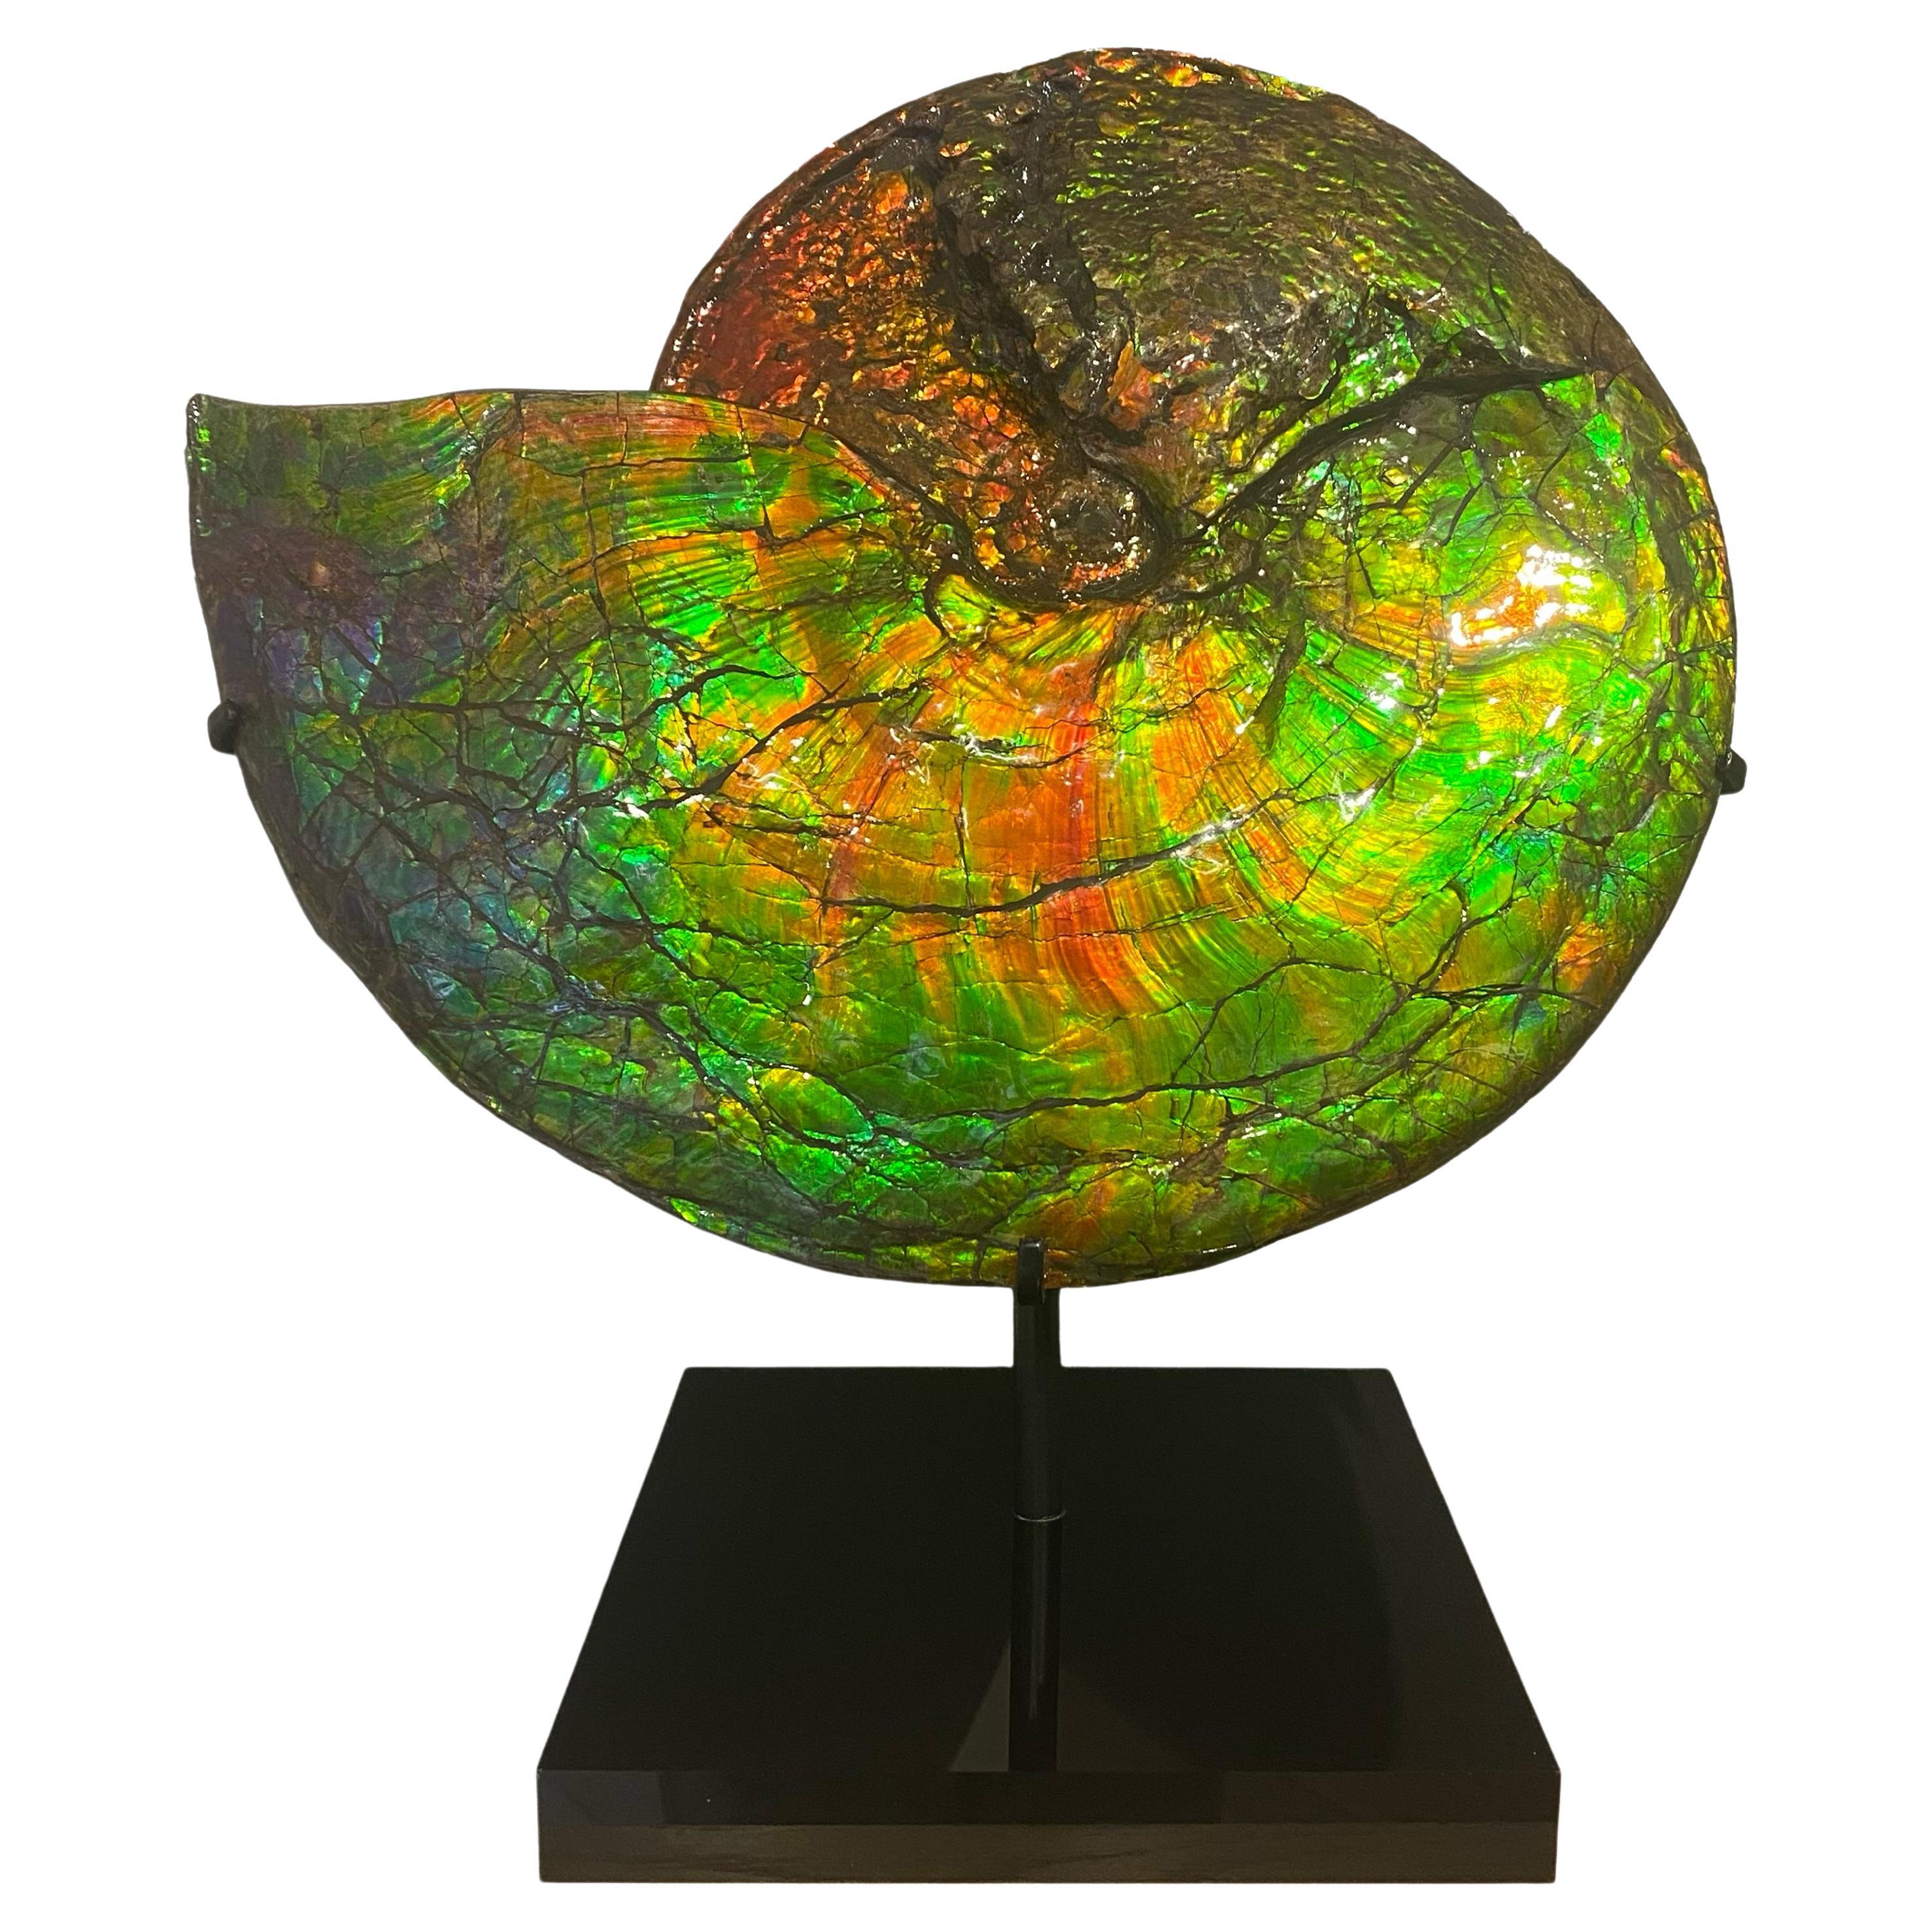 Rare Iridescent Ammonite Fossil with Blue, Green, Red and Orange Hues. For Sale